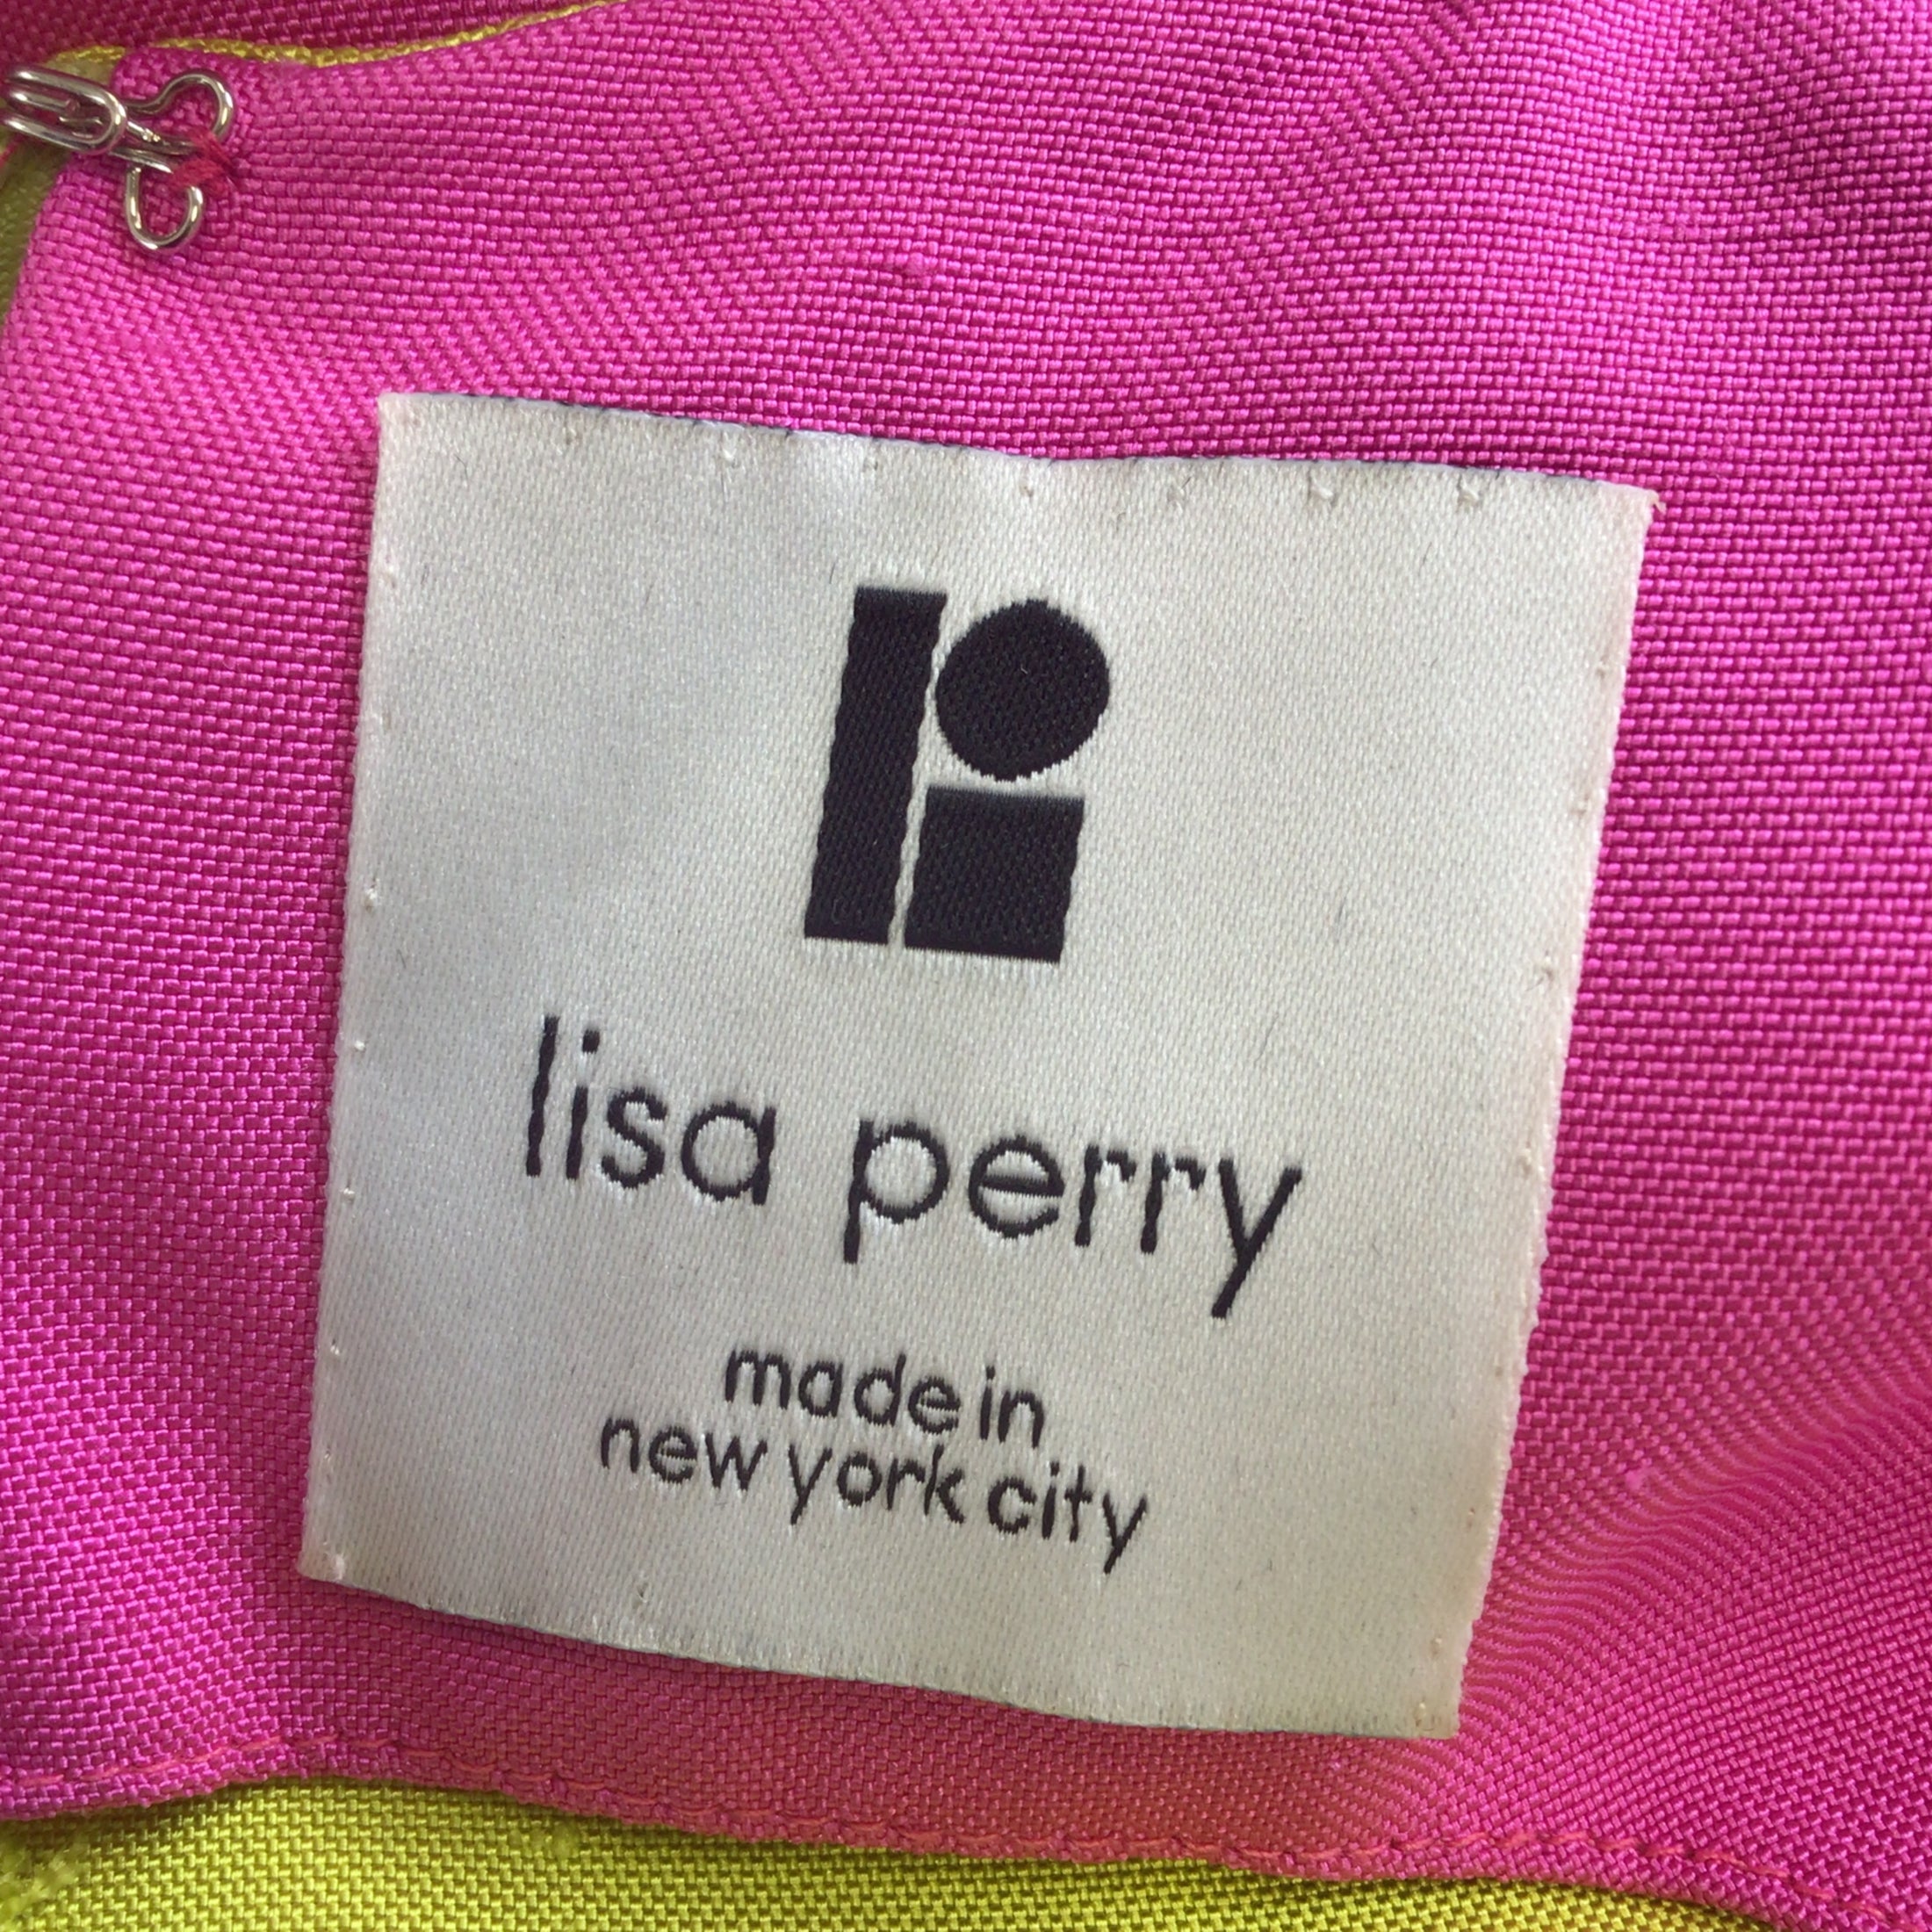 Lisa Perry Lime Green / Hot Pink Sleeveless Colorblock Dress